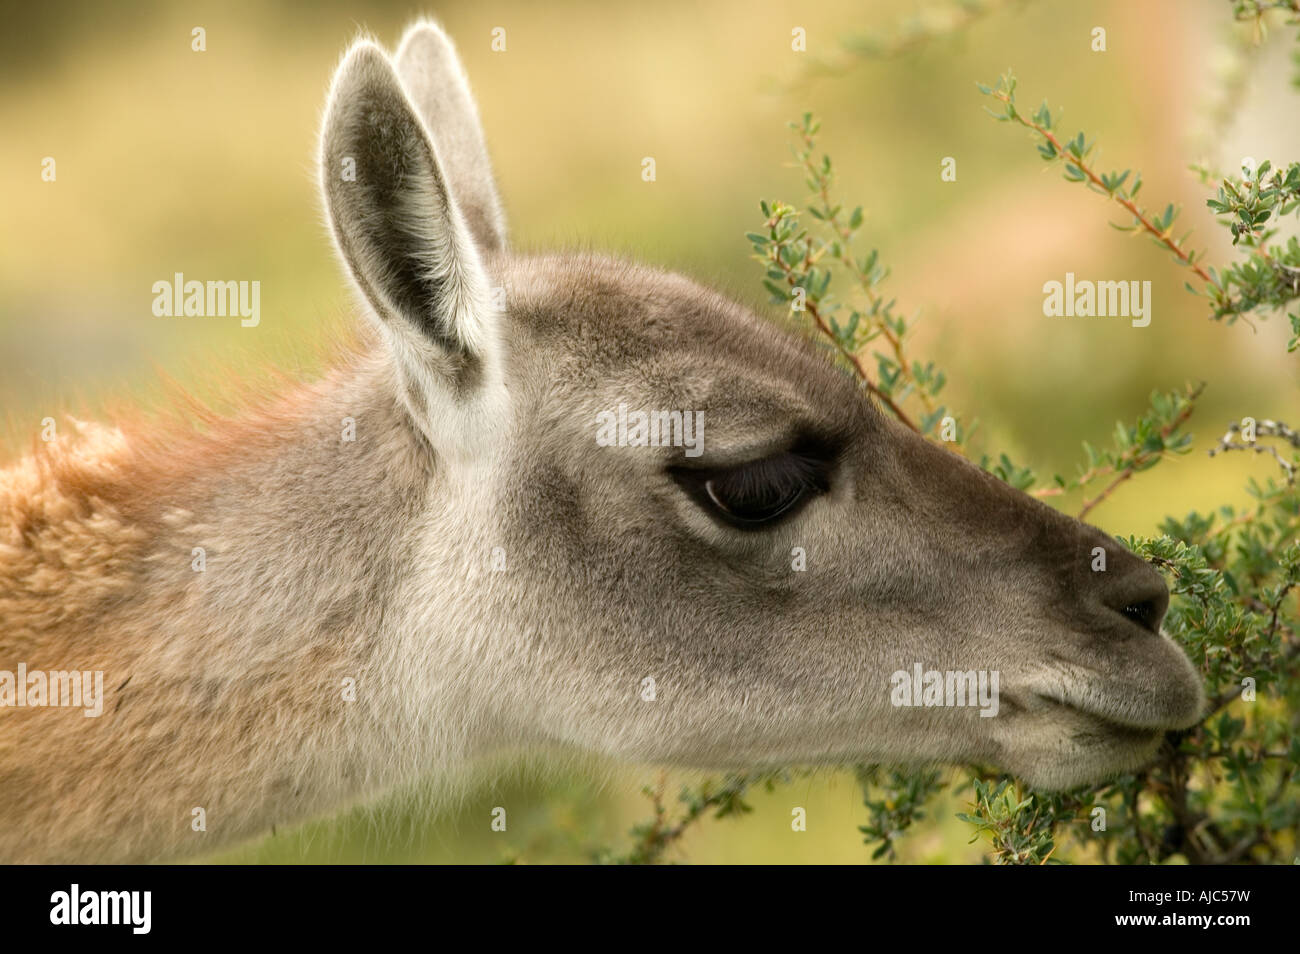 Close Up of Adult Guanaco Browsing on the Hillside Stock Photo